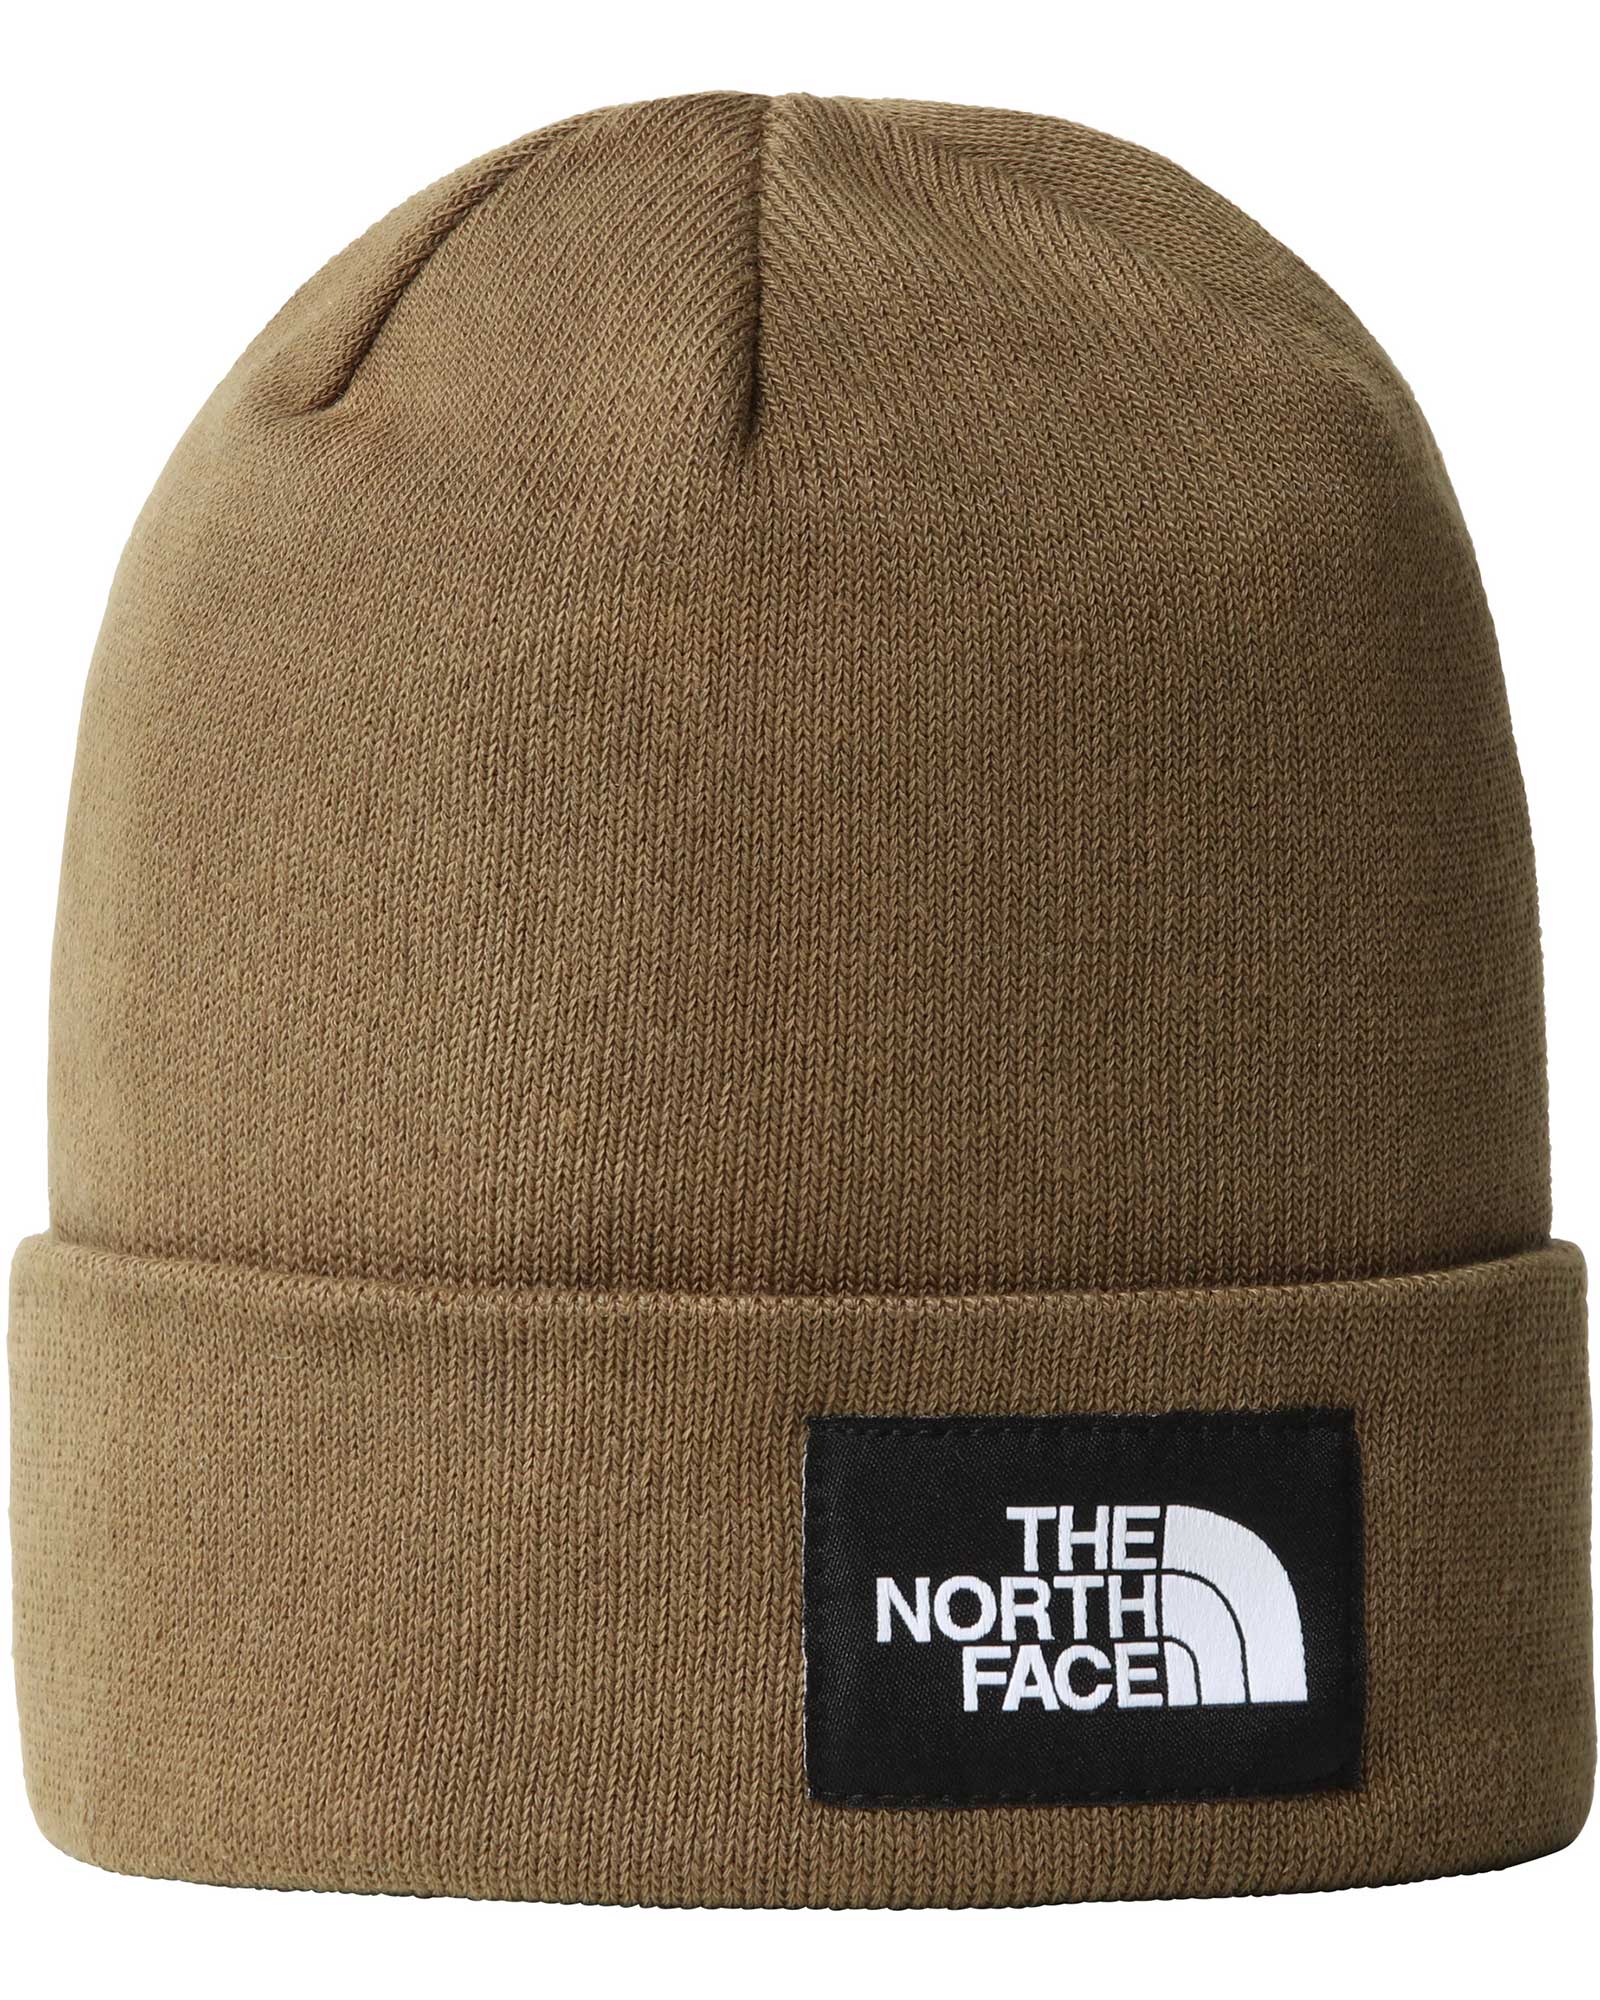 The North Face Dock Worker Recycled Beanie - Military Olive